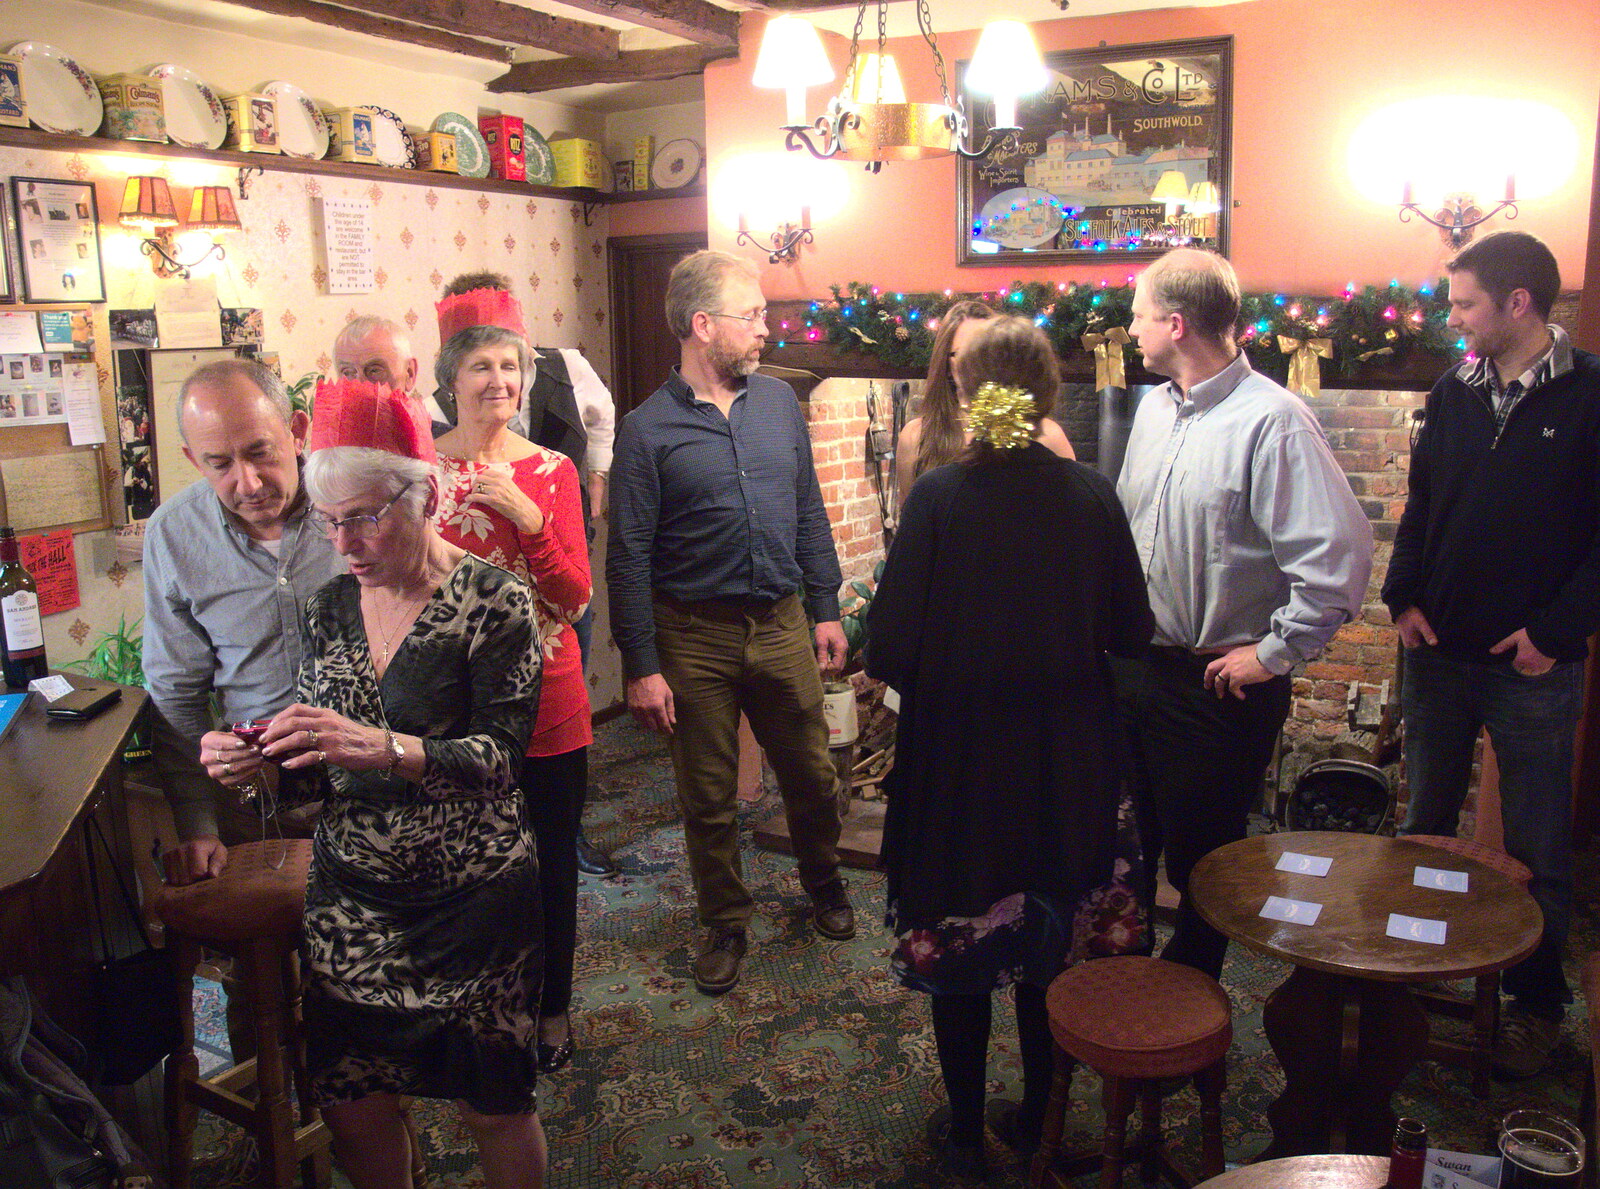 The BSCC Christmas Dinner at The Swan Inn, Brome, Suffolk - 3rd December 2016: A post-dinner assemblage around the fire